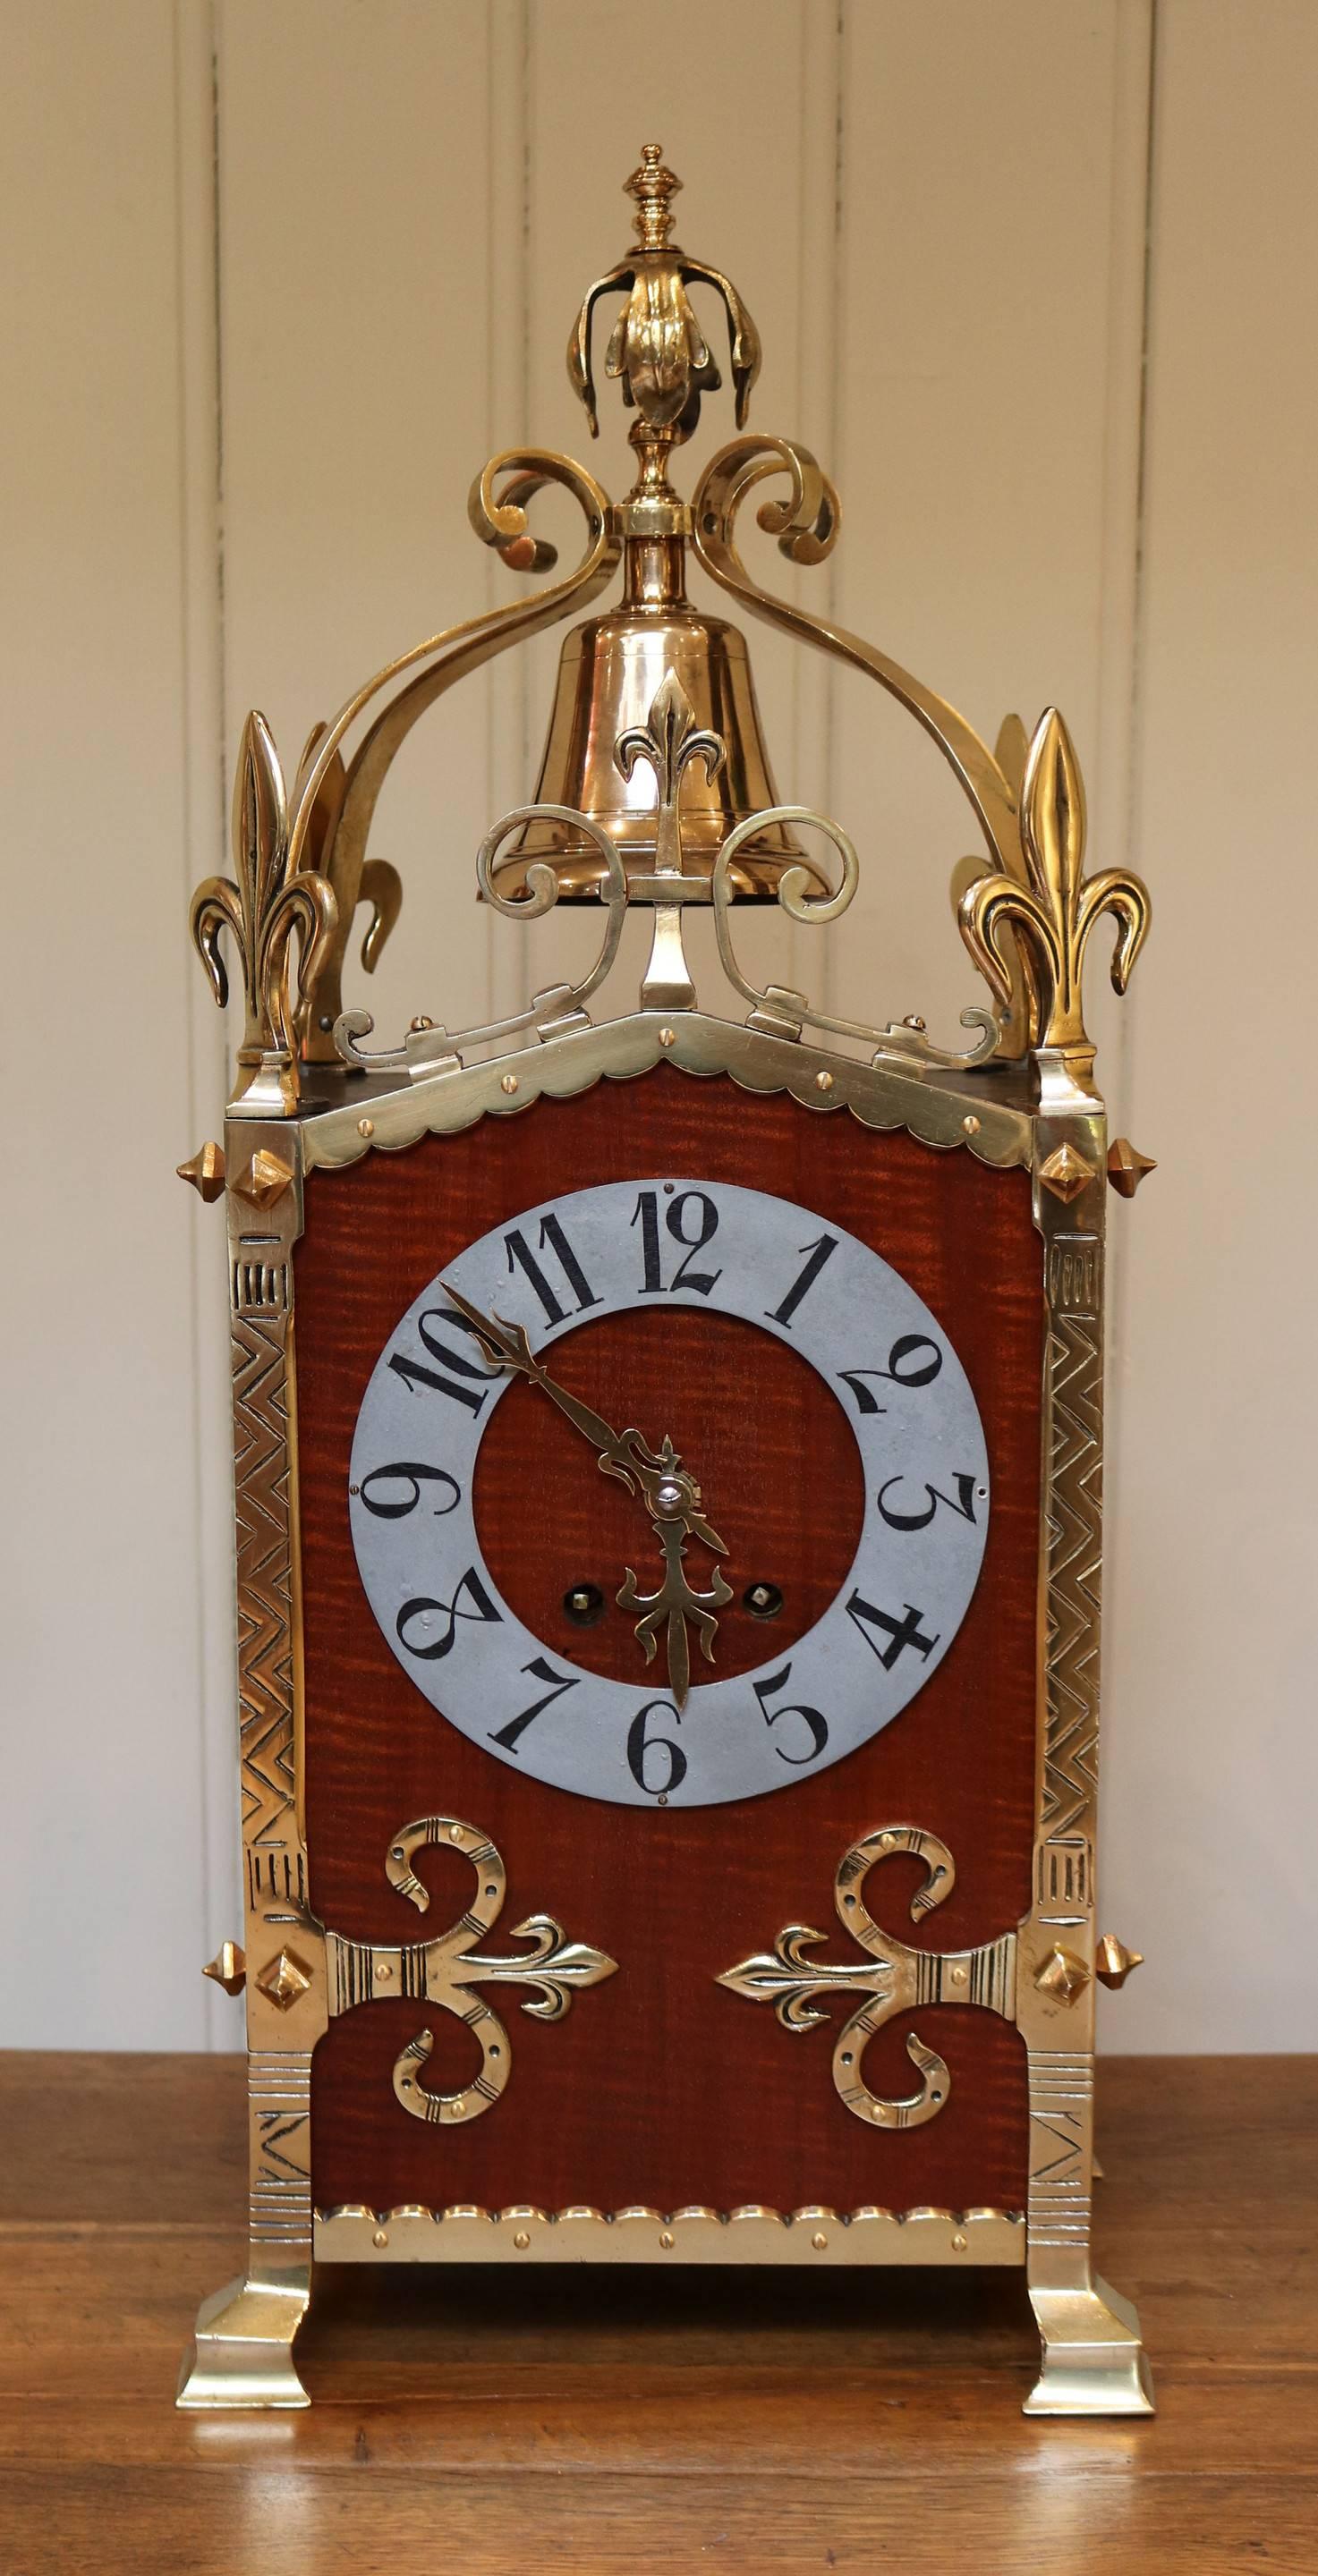 A very impressive mahogany and brass Gothic style clock garniture, dating to the early 1900s. The clock has a solid rectangular case, veneered in fiddle back mahogany, with a stylized silvered chapter ring. The brass frame has fleur de lis terminals